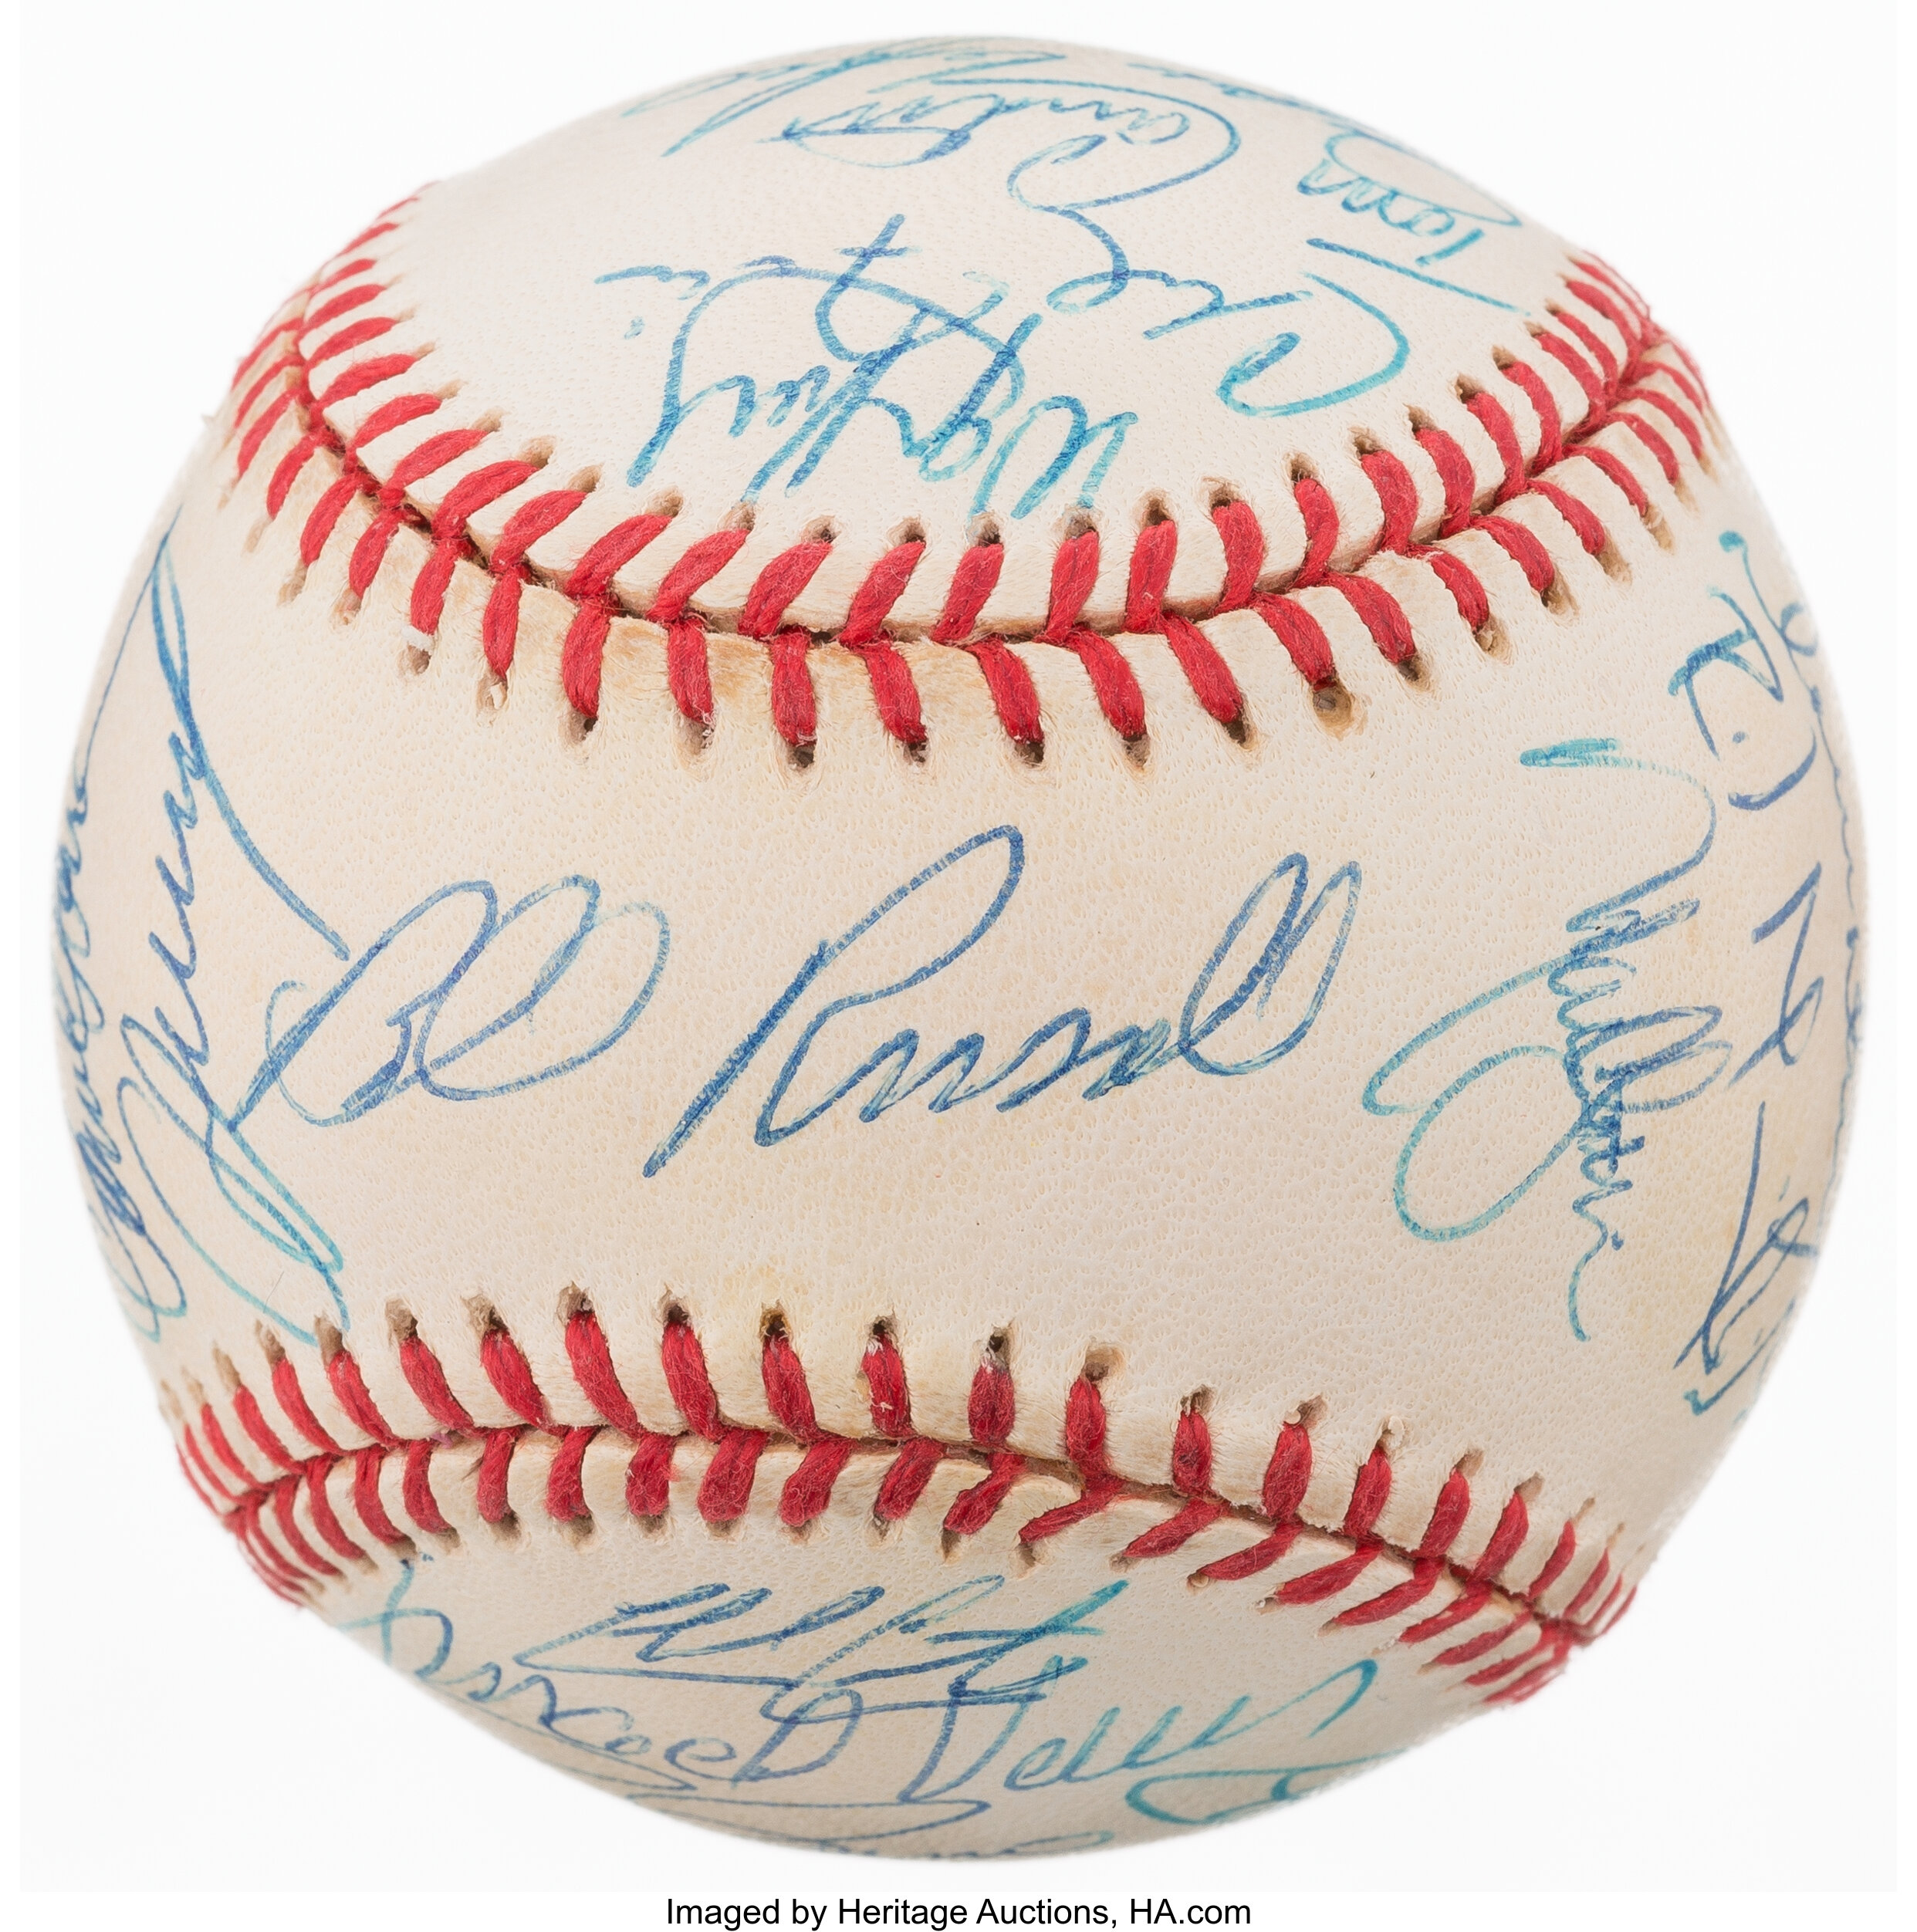 At Auction: ERIC KARROS AUTOGRAPHED BASEBALL